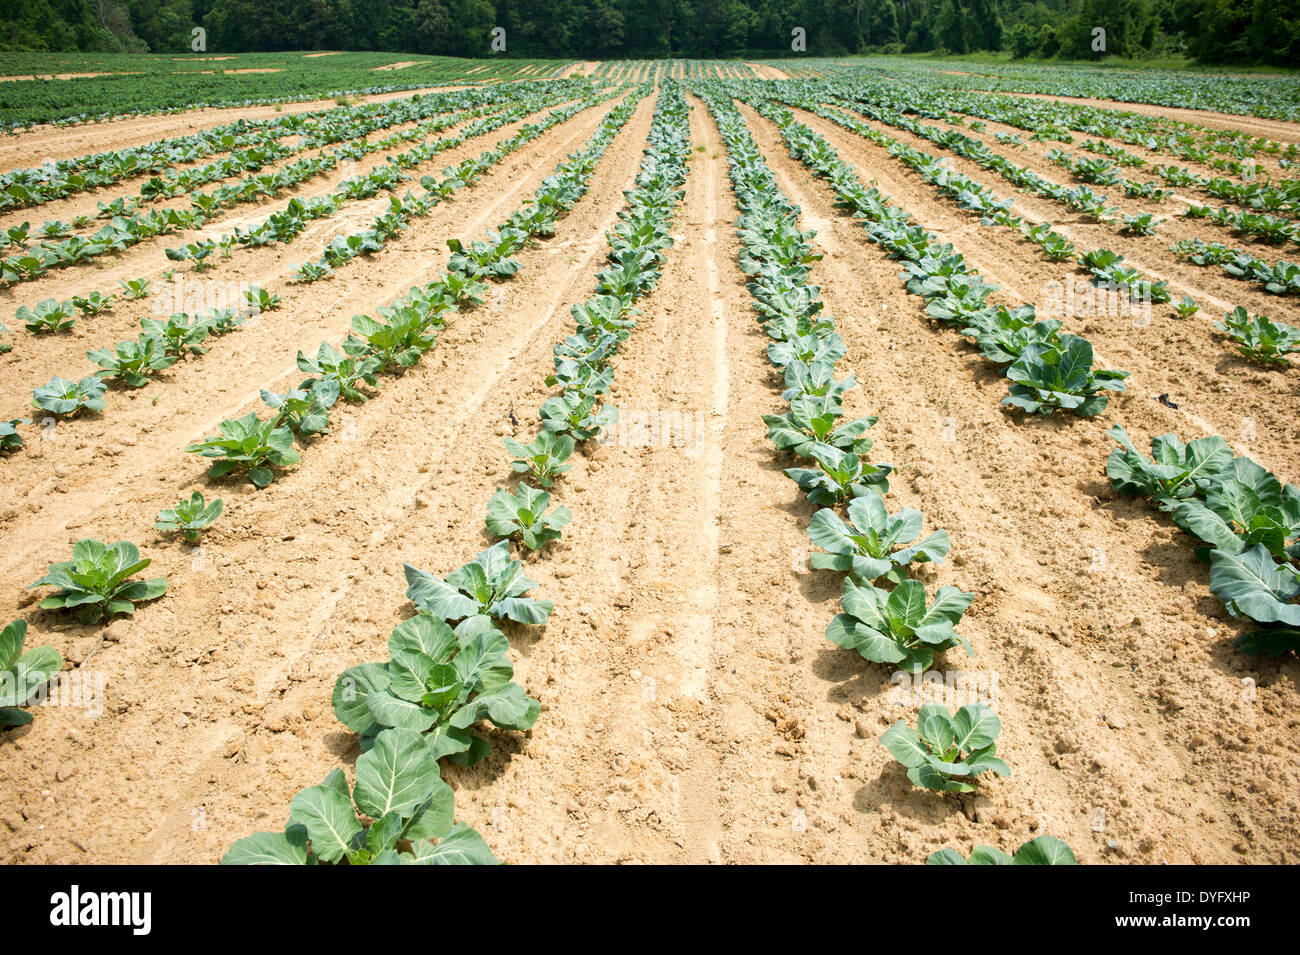 Rows of Vegetable Plants- Clinton MD Stock Photo